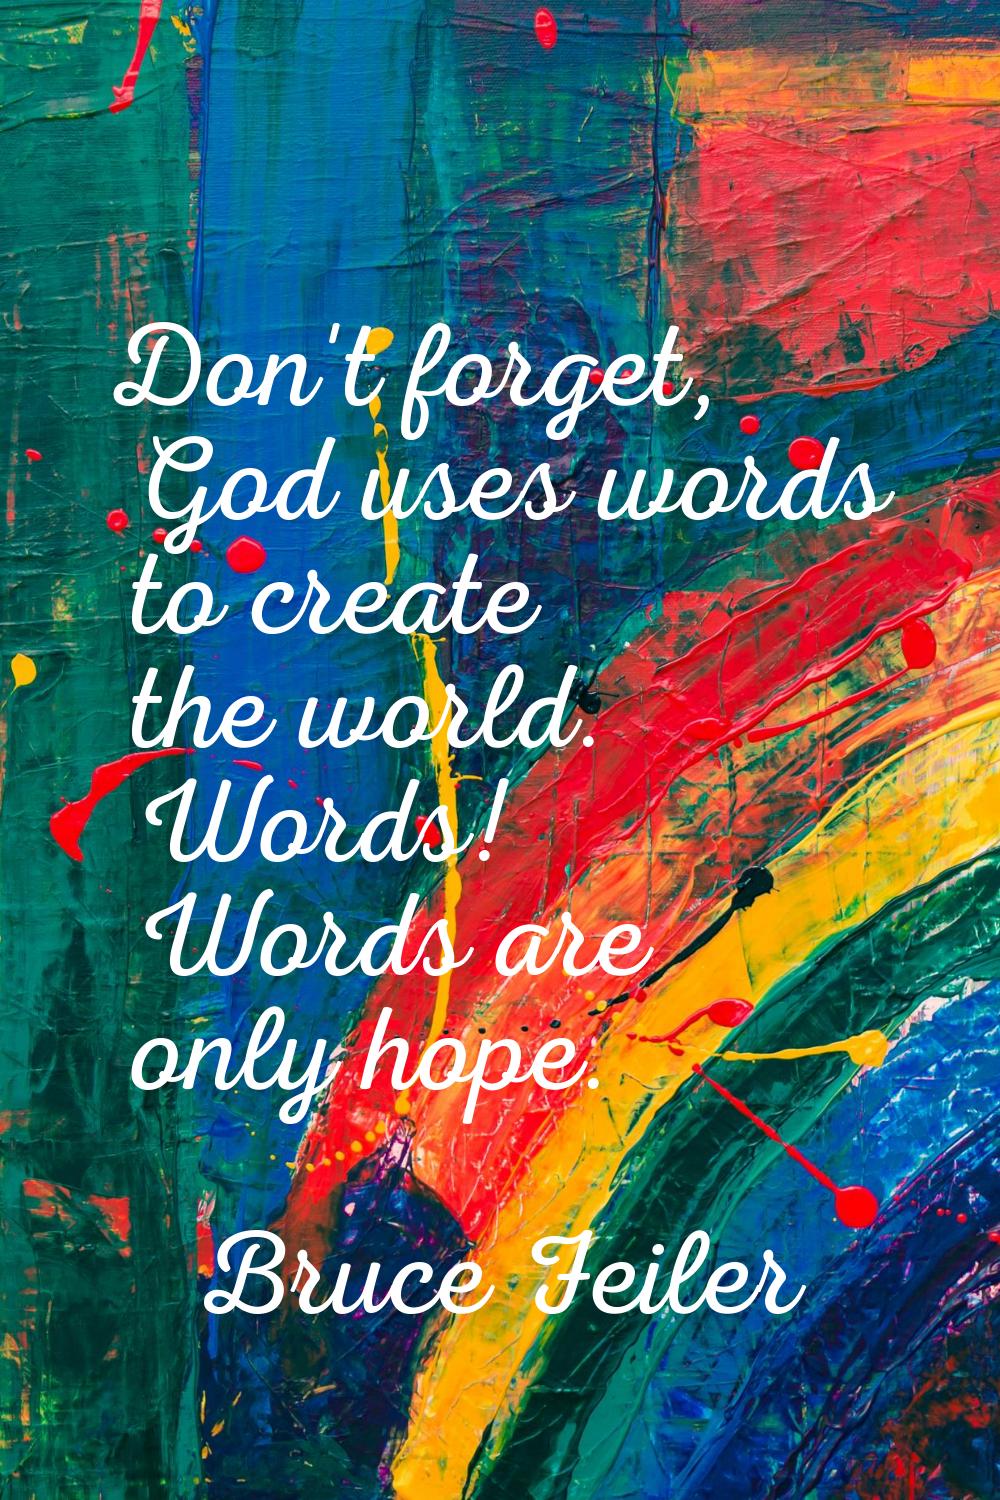 Don't forget, God uses words to create the world. Words! Words are only hope.